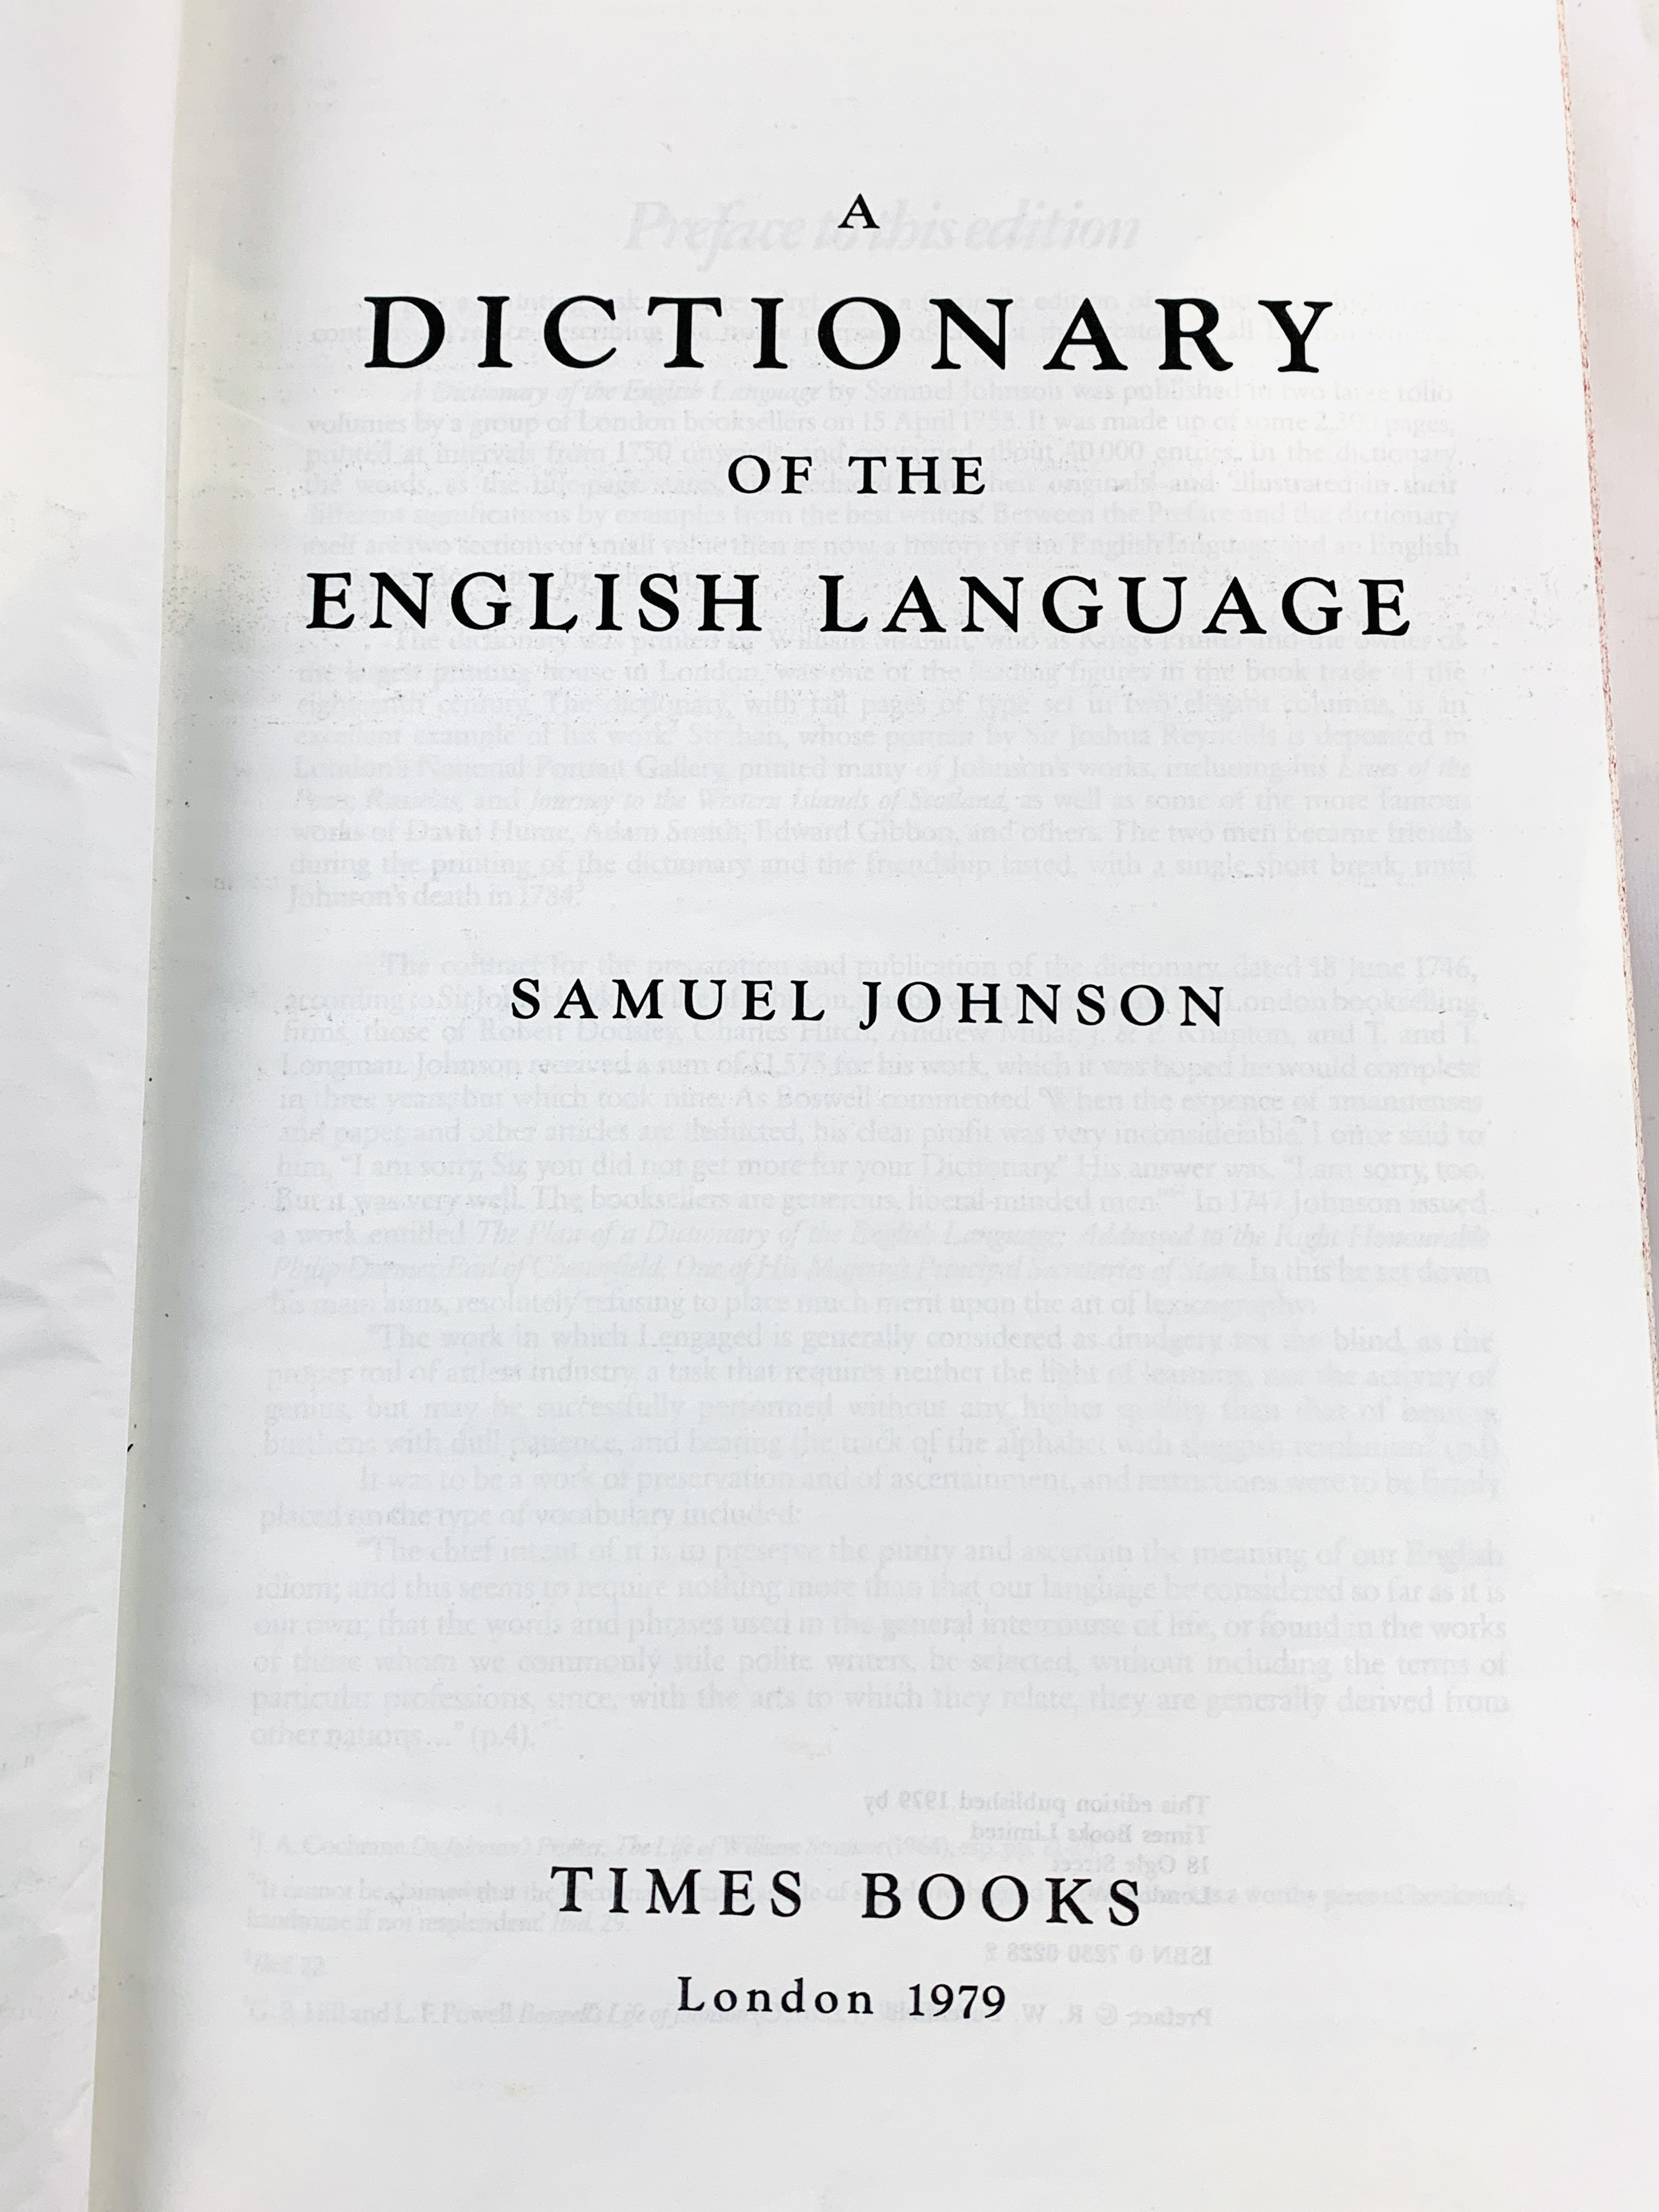 Dictionary of the English Language by Samuel Johnson by Times Books 1979 - Image 2 of 4